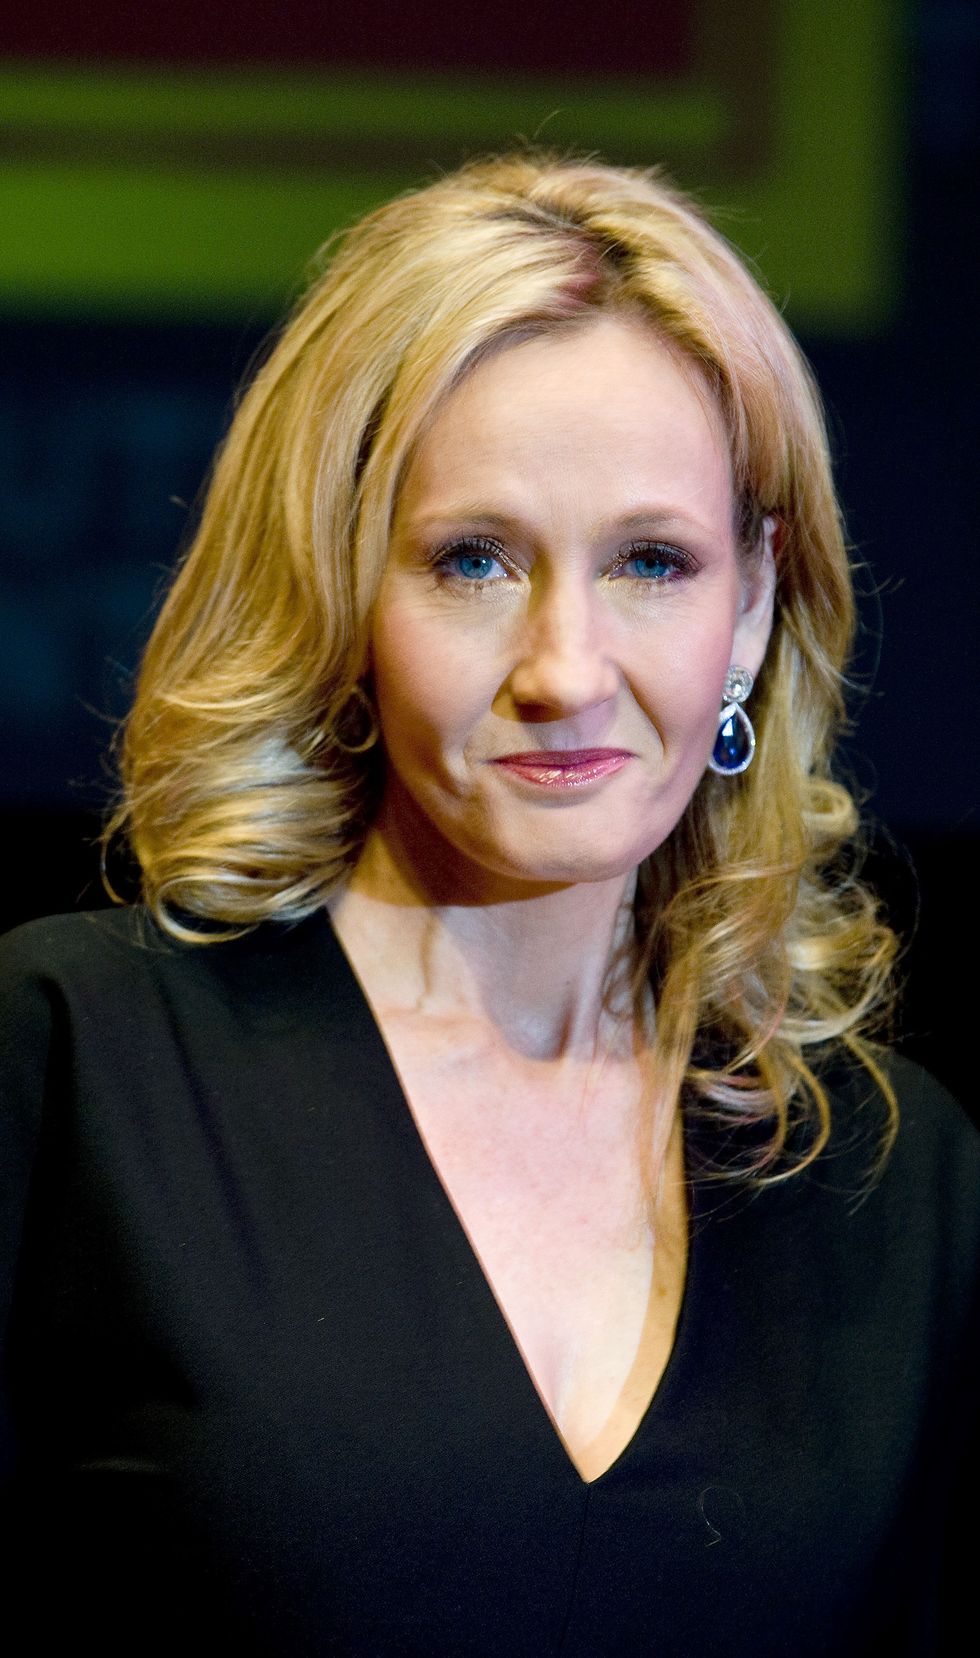 JK Rowling challenges trans charity Mermaids to sue her in Twitter spat